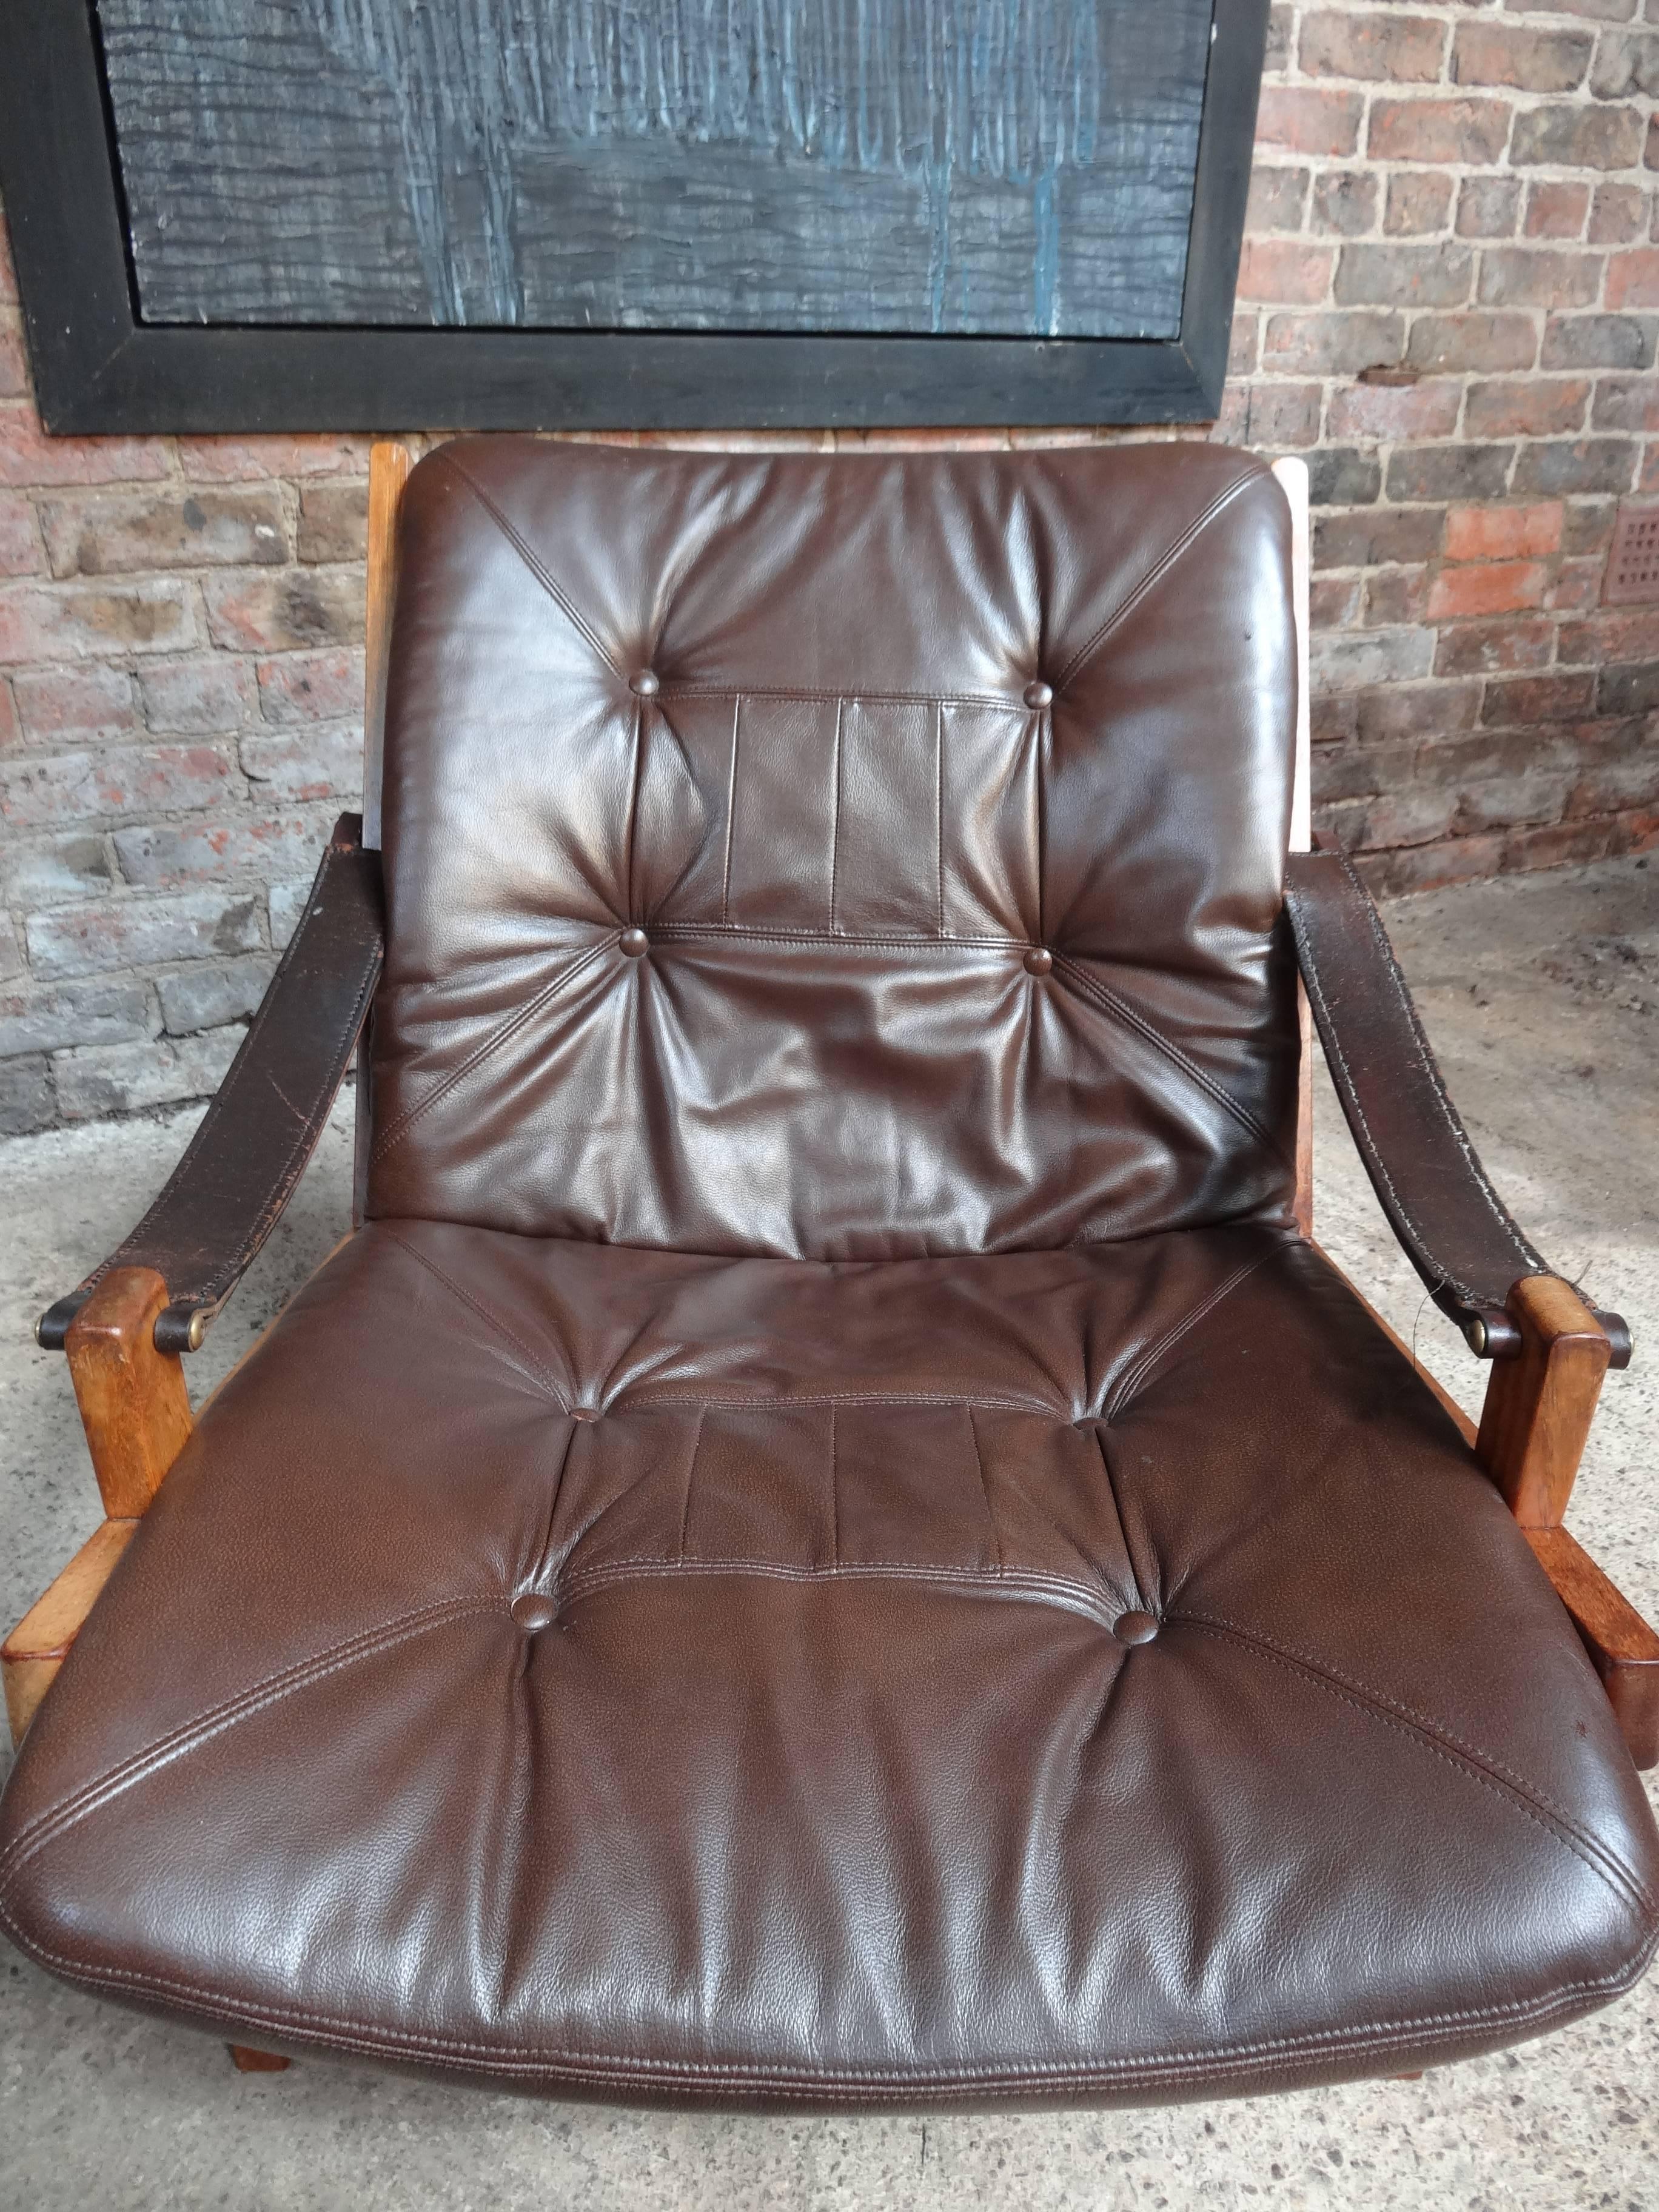 Stunning sling leather armchair designed by Torbjørn Afdal and made by Bruksbo in Norway, in great vintage condition and leather seat has been newly up-holstered.
Measures:
Seat height: 40 cm, height: 80 cm, depth: 81 cm, width: 67 cm.